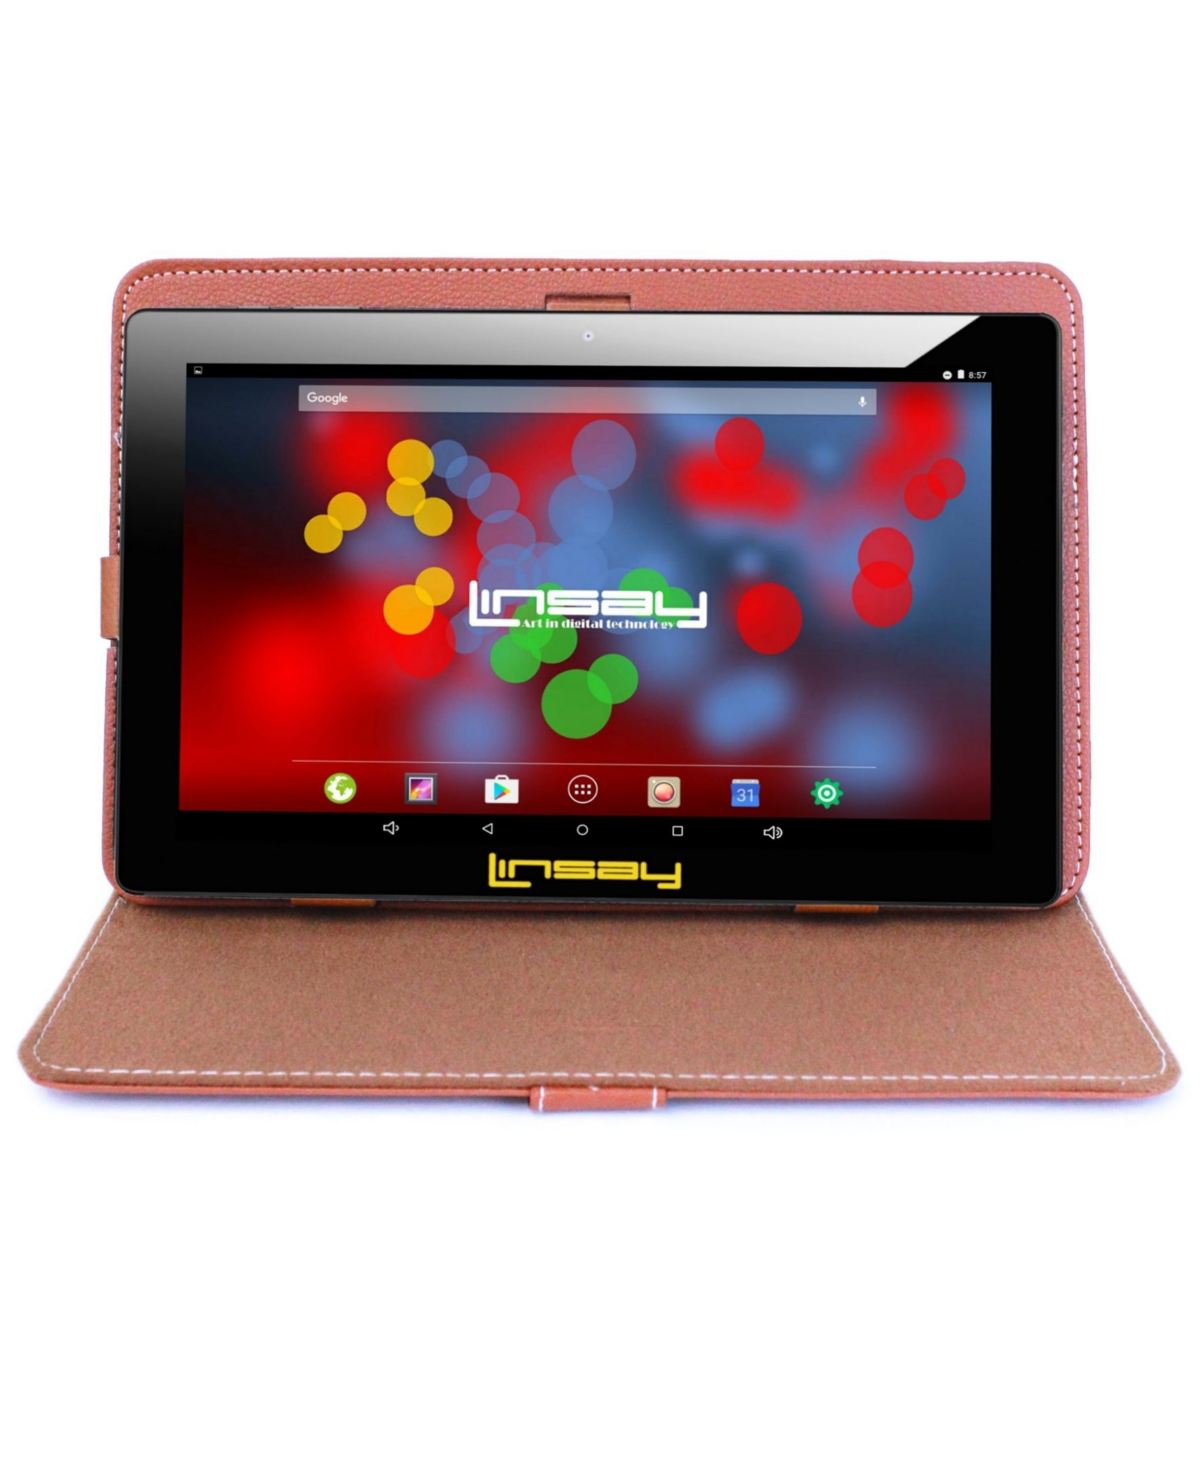 Linsay 10.1" 1280 x 800 Ips Screen Quad Core 2 Gb Ram Tablet 16 Gb Android 6.0 with Leather Case